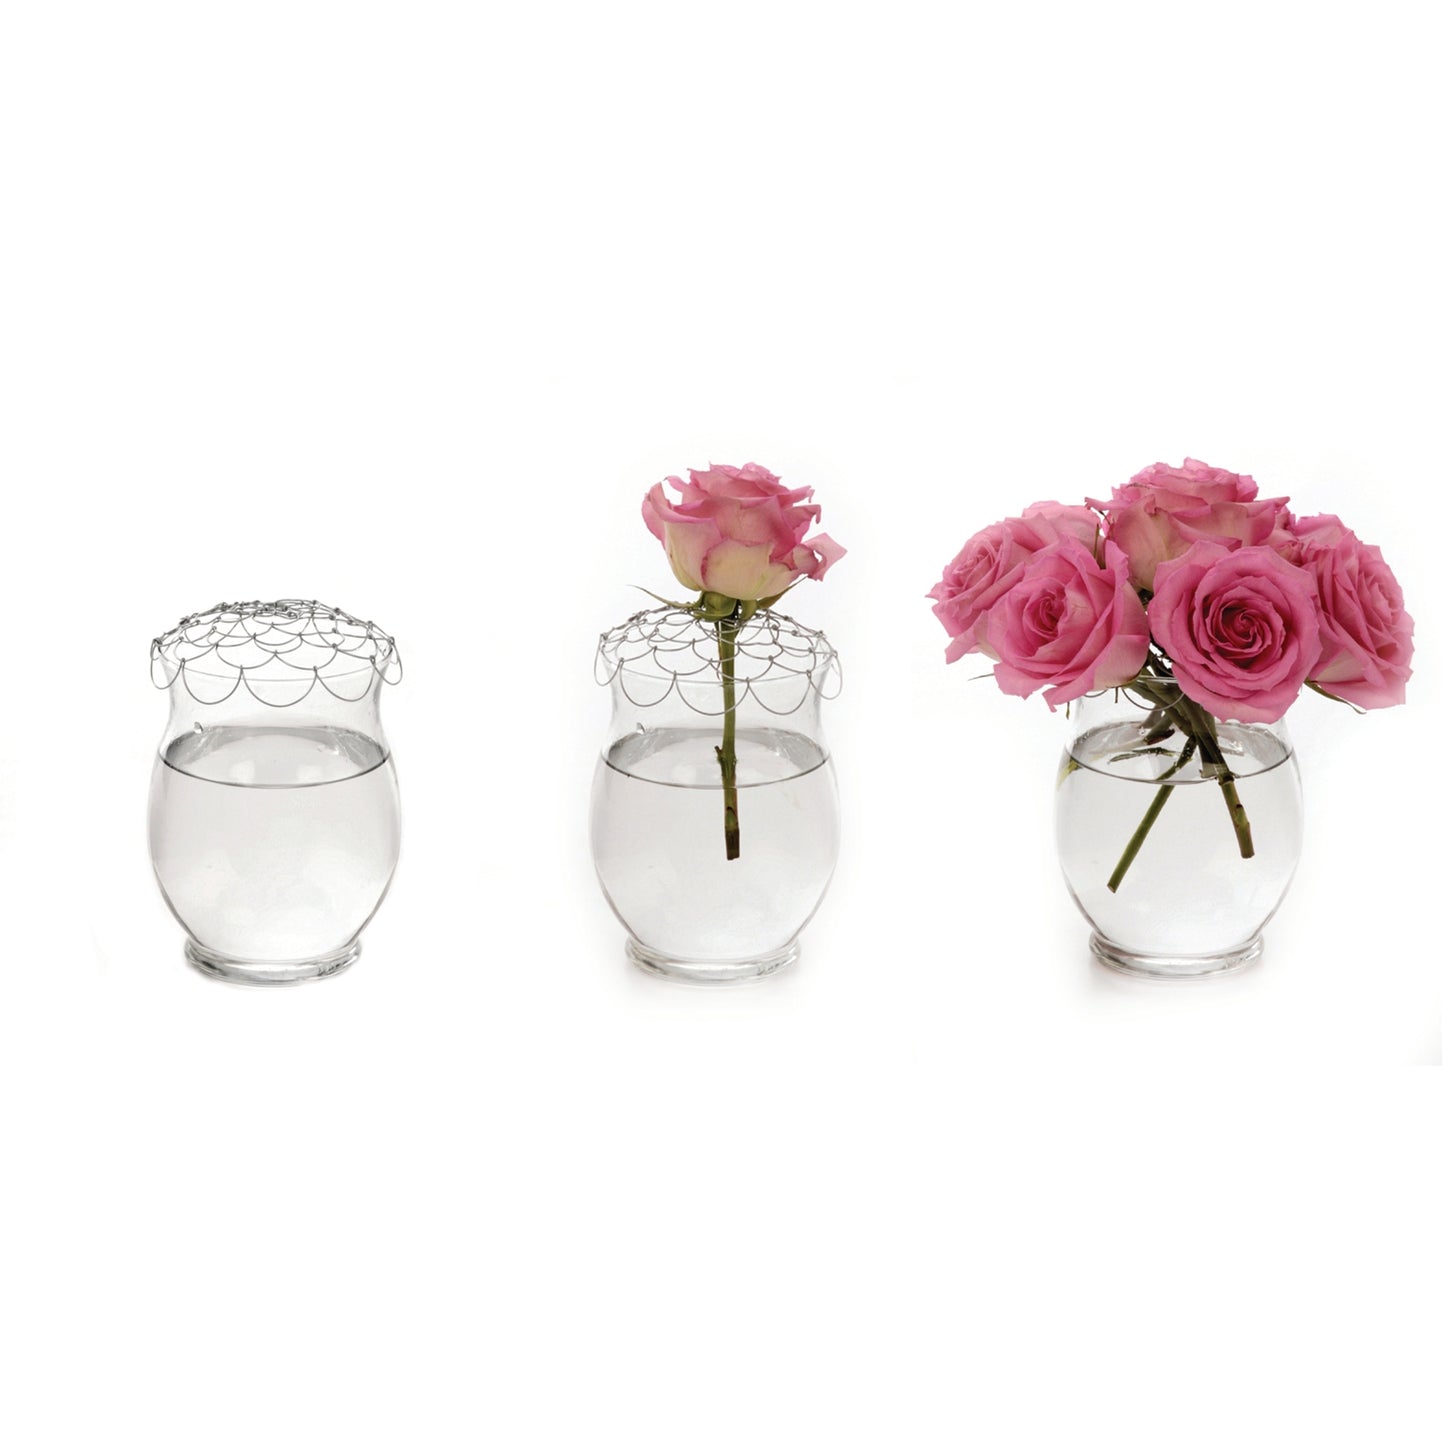 Three glass vases with easy arranger on each one of them and two are showing how the pink roses fill the vase.